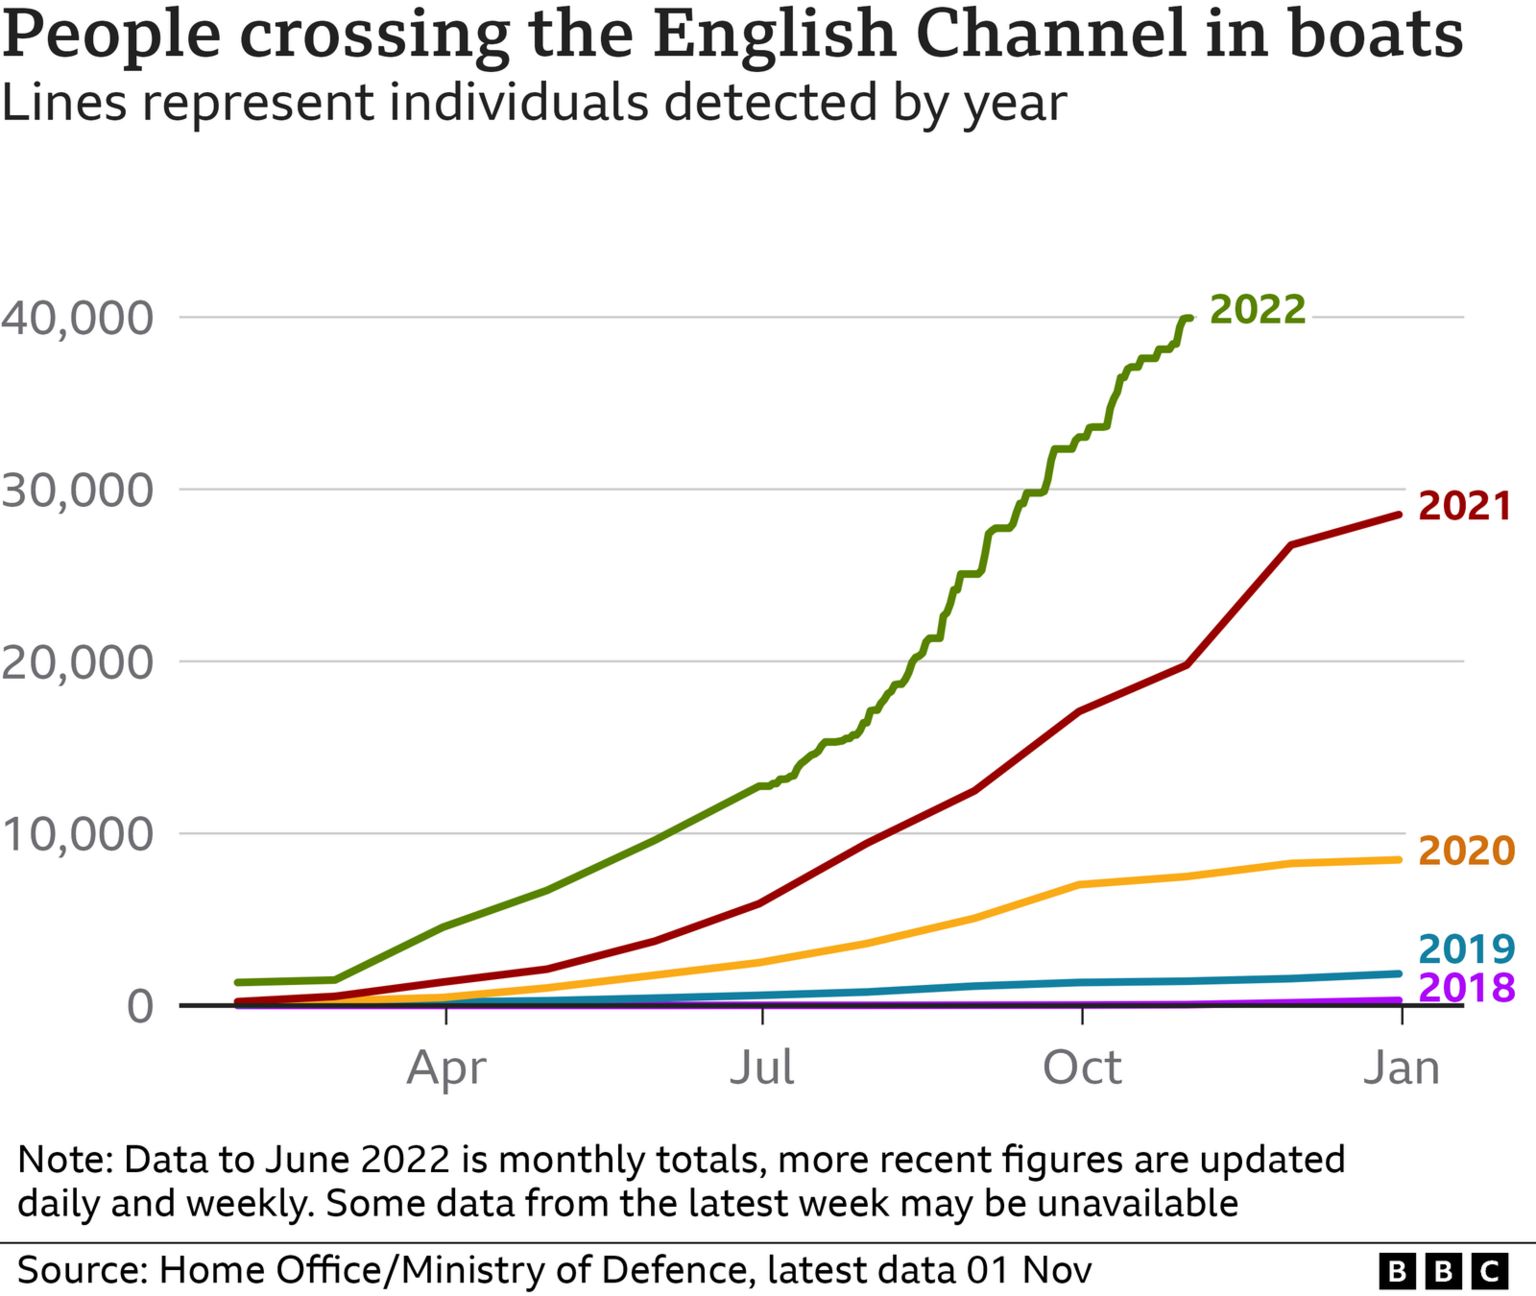 Chart showing the number of people crossing the English Channel in boats